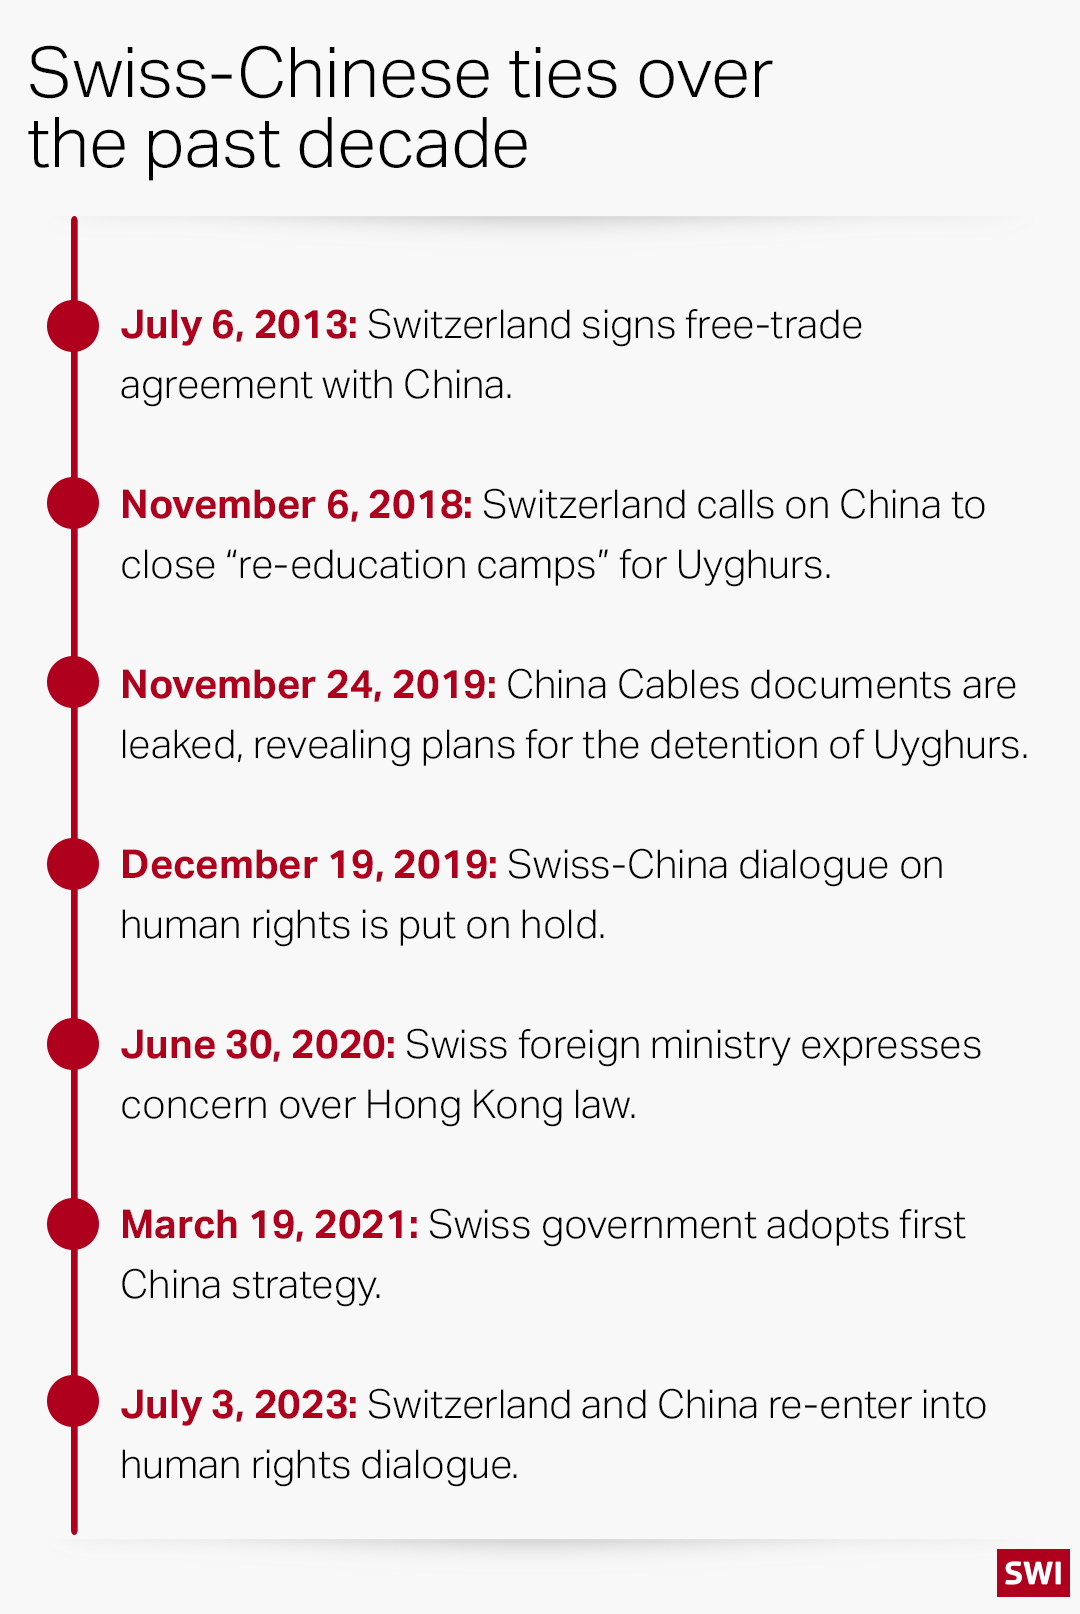 Timeline of Swiss-Chinese official relations.